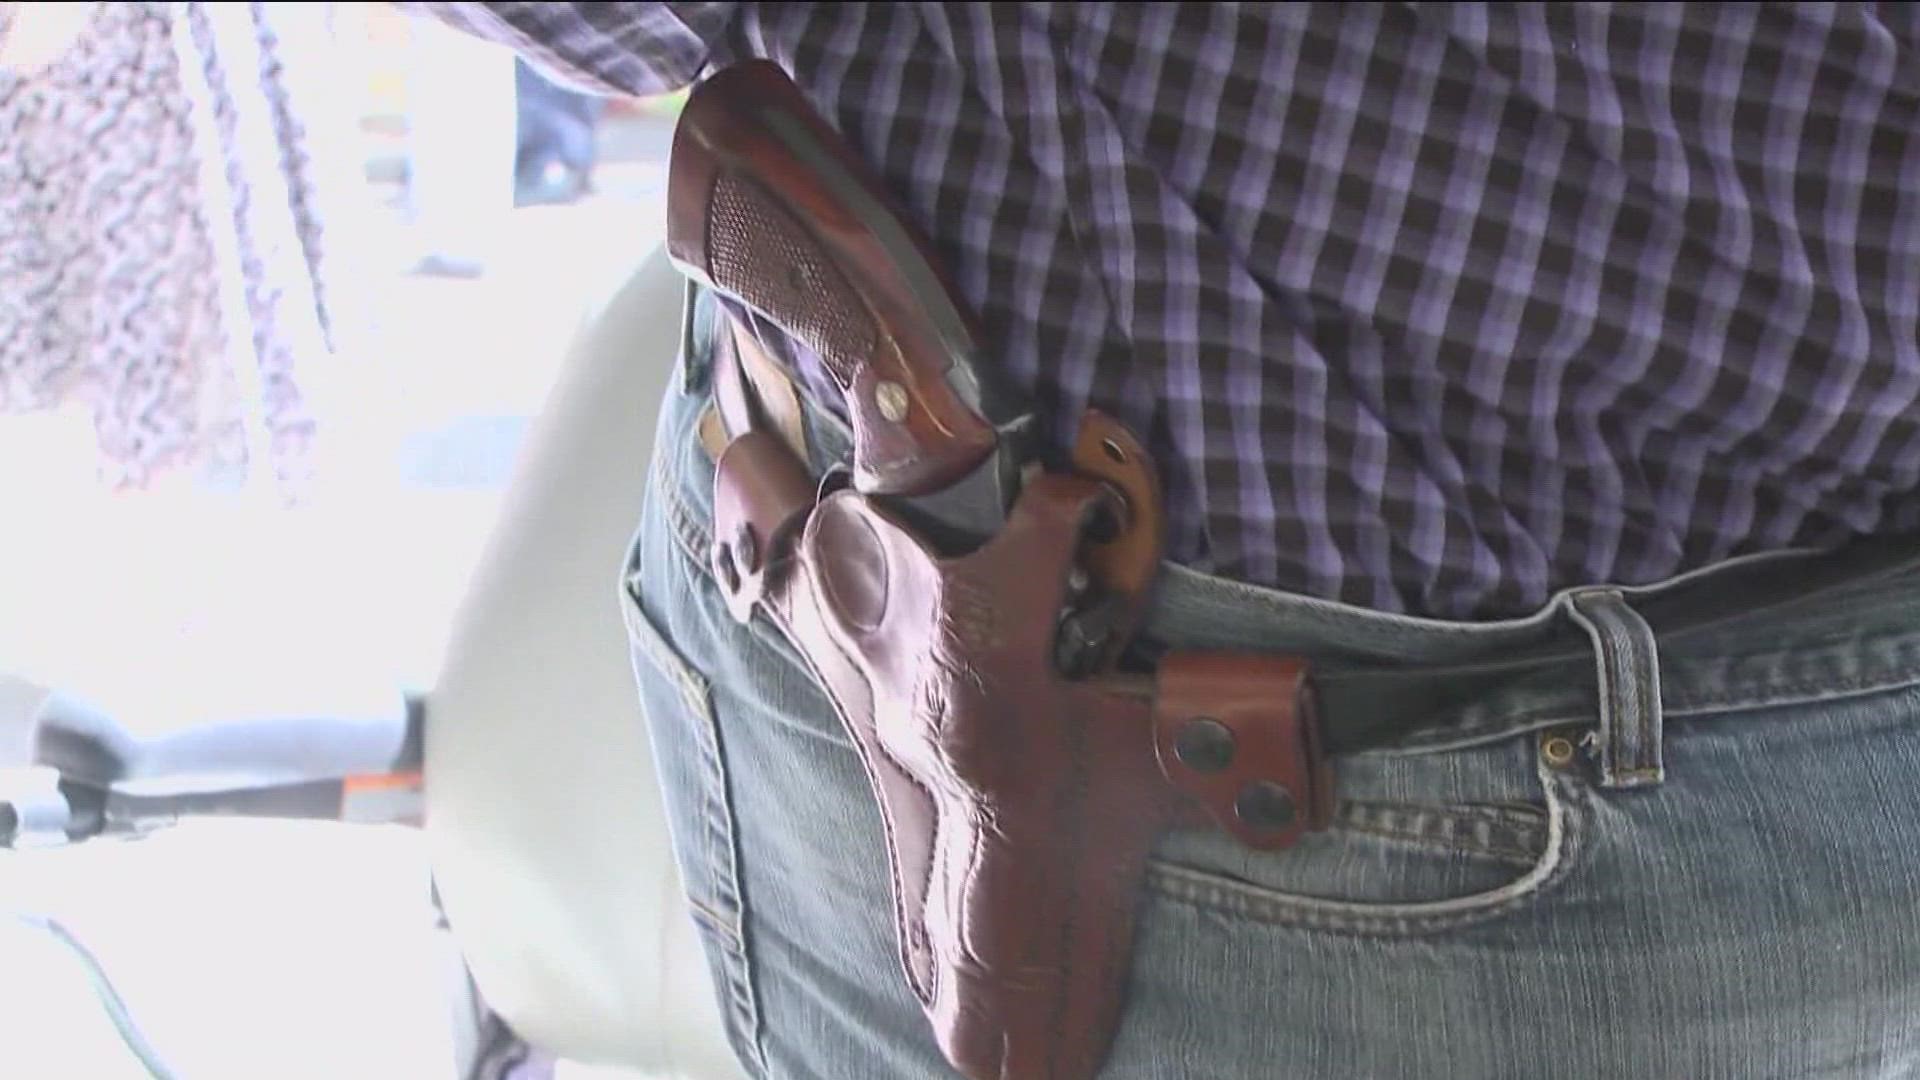 Georgia's concealed carry law recently expanded earlier this year and shoppers are out in abundance due to lower COVID numbers.